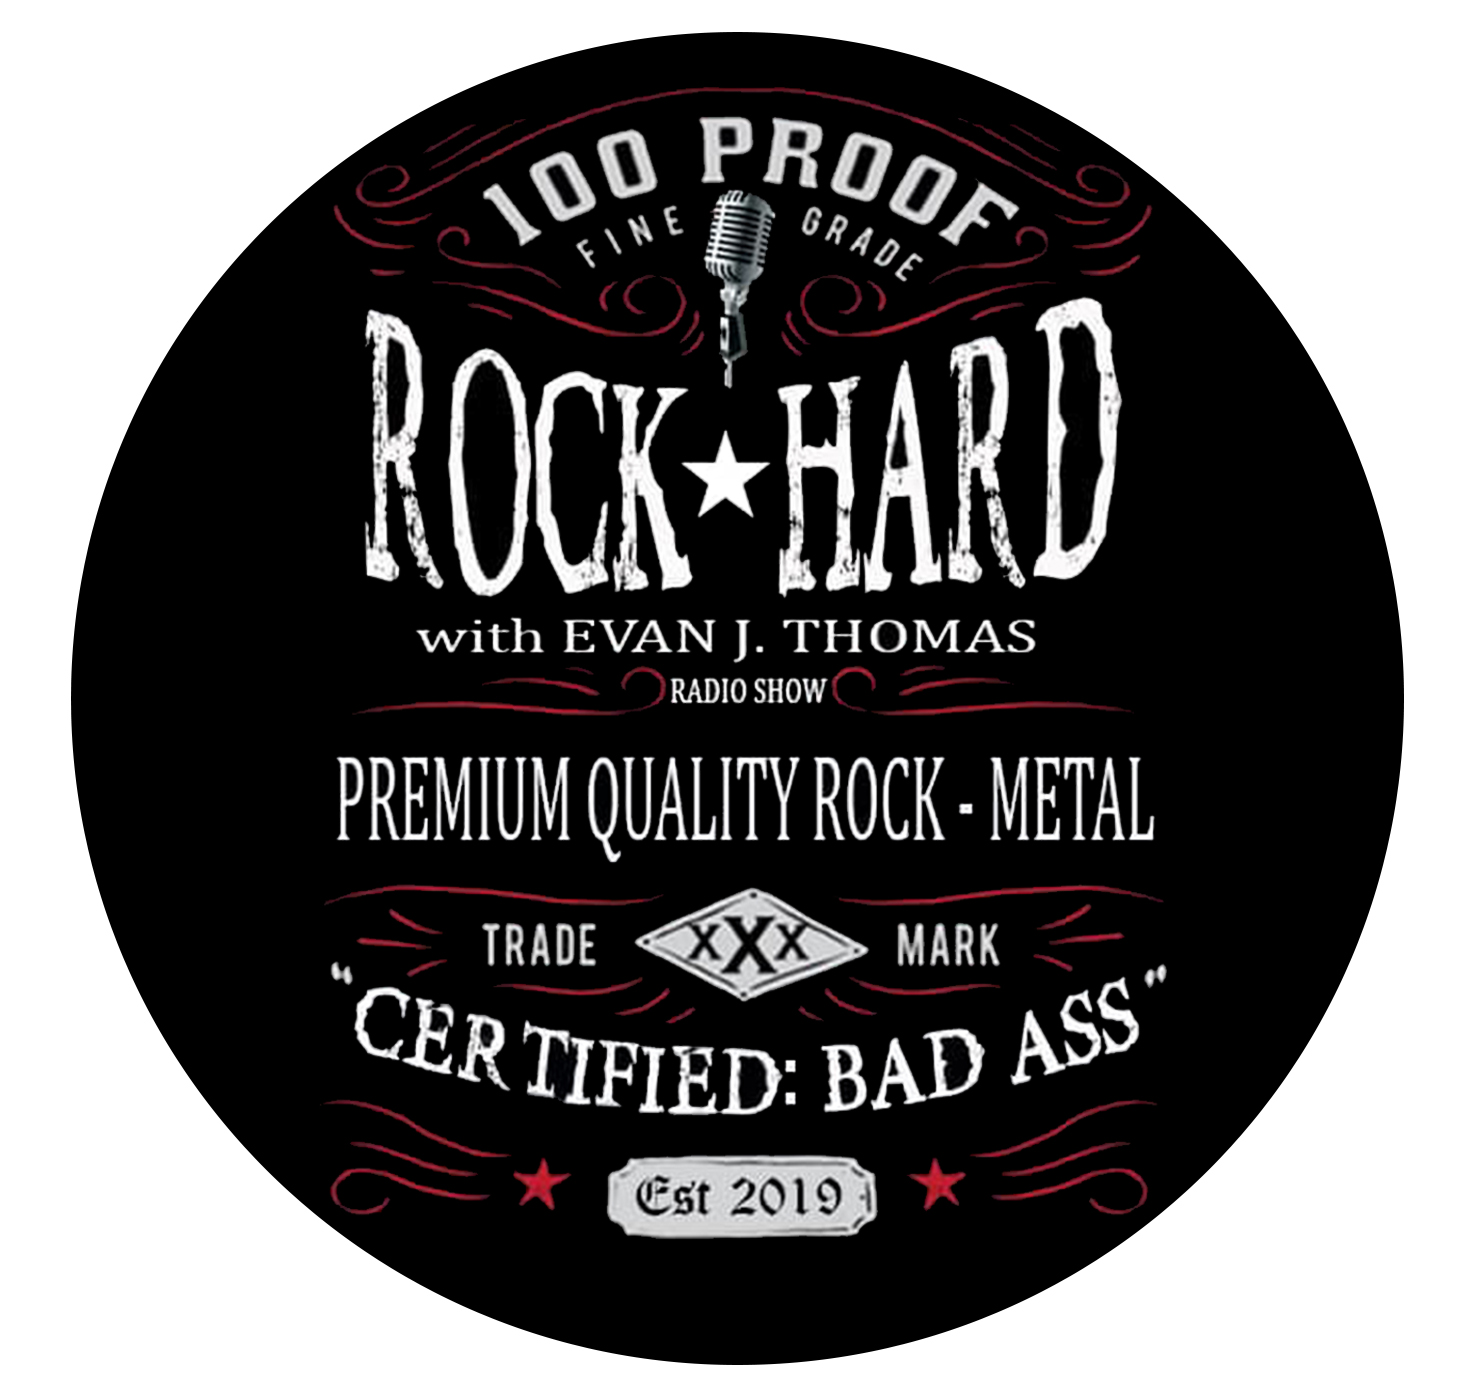 Art for Thursday's at 7pm CT by Rock Hard with Evan J. Thomas